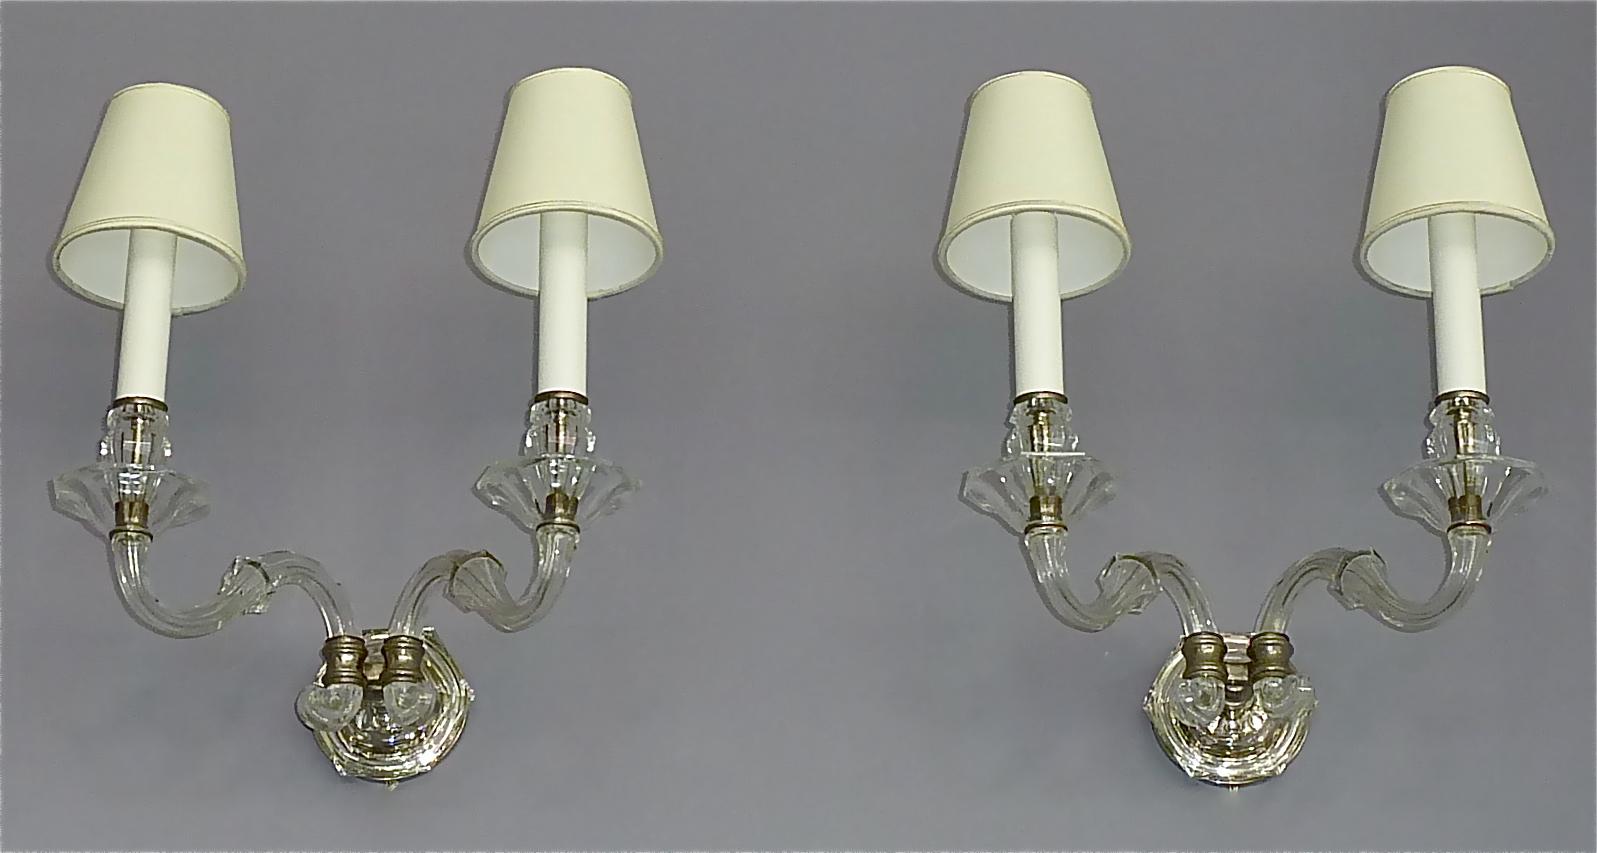 Pair of Art Deco Faceted Crystal Glass Wall Lights Sconces 1920, Baccarat Style 6